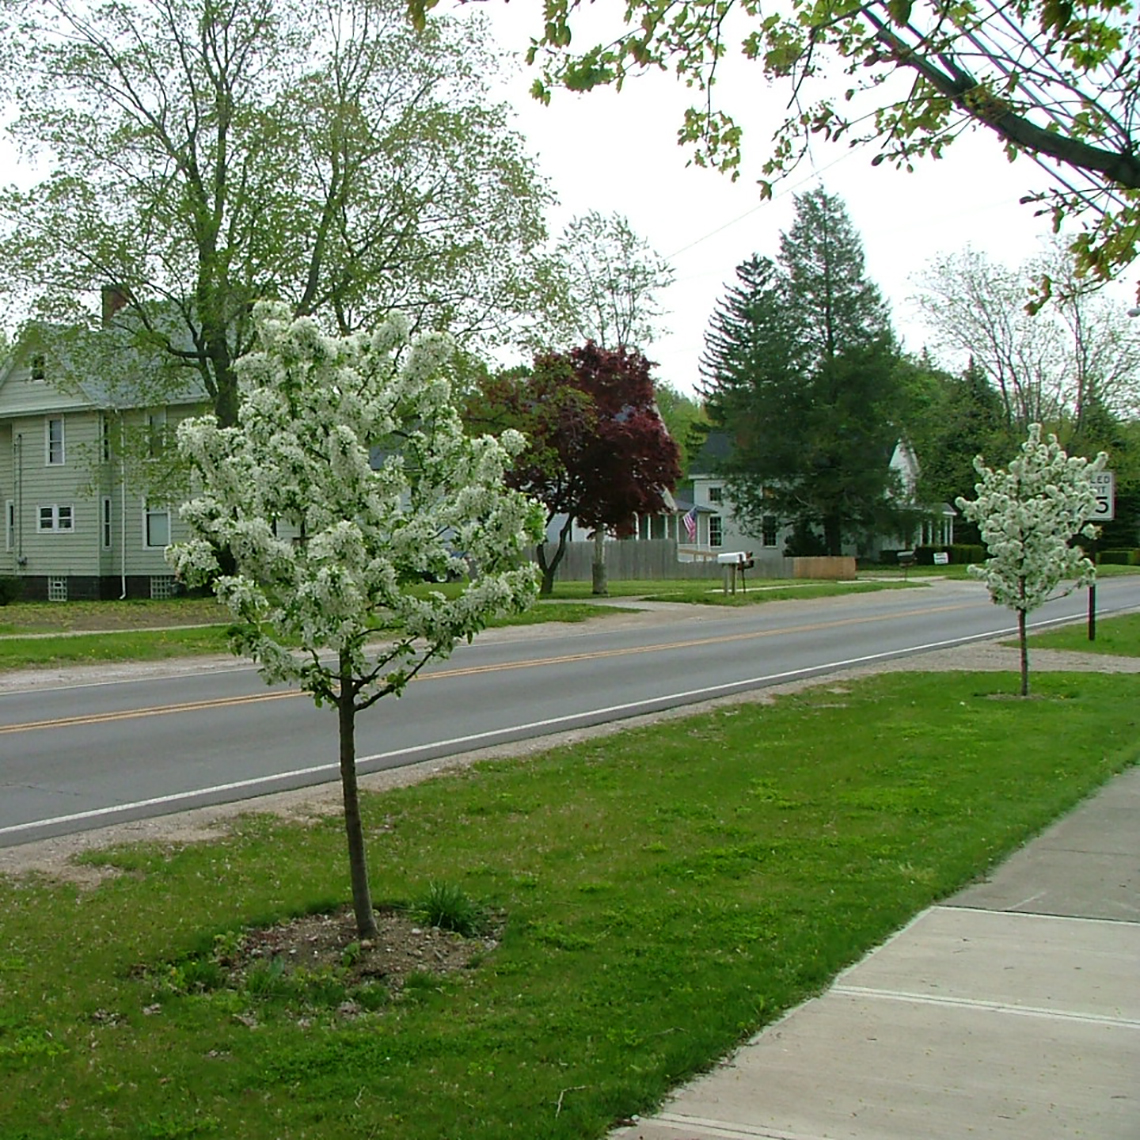 Sweet Sugar Tyme crabapple trees in bloom with white flowers